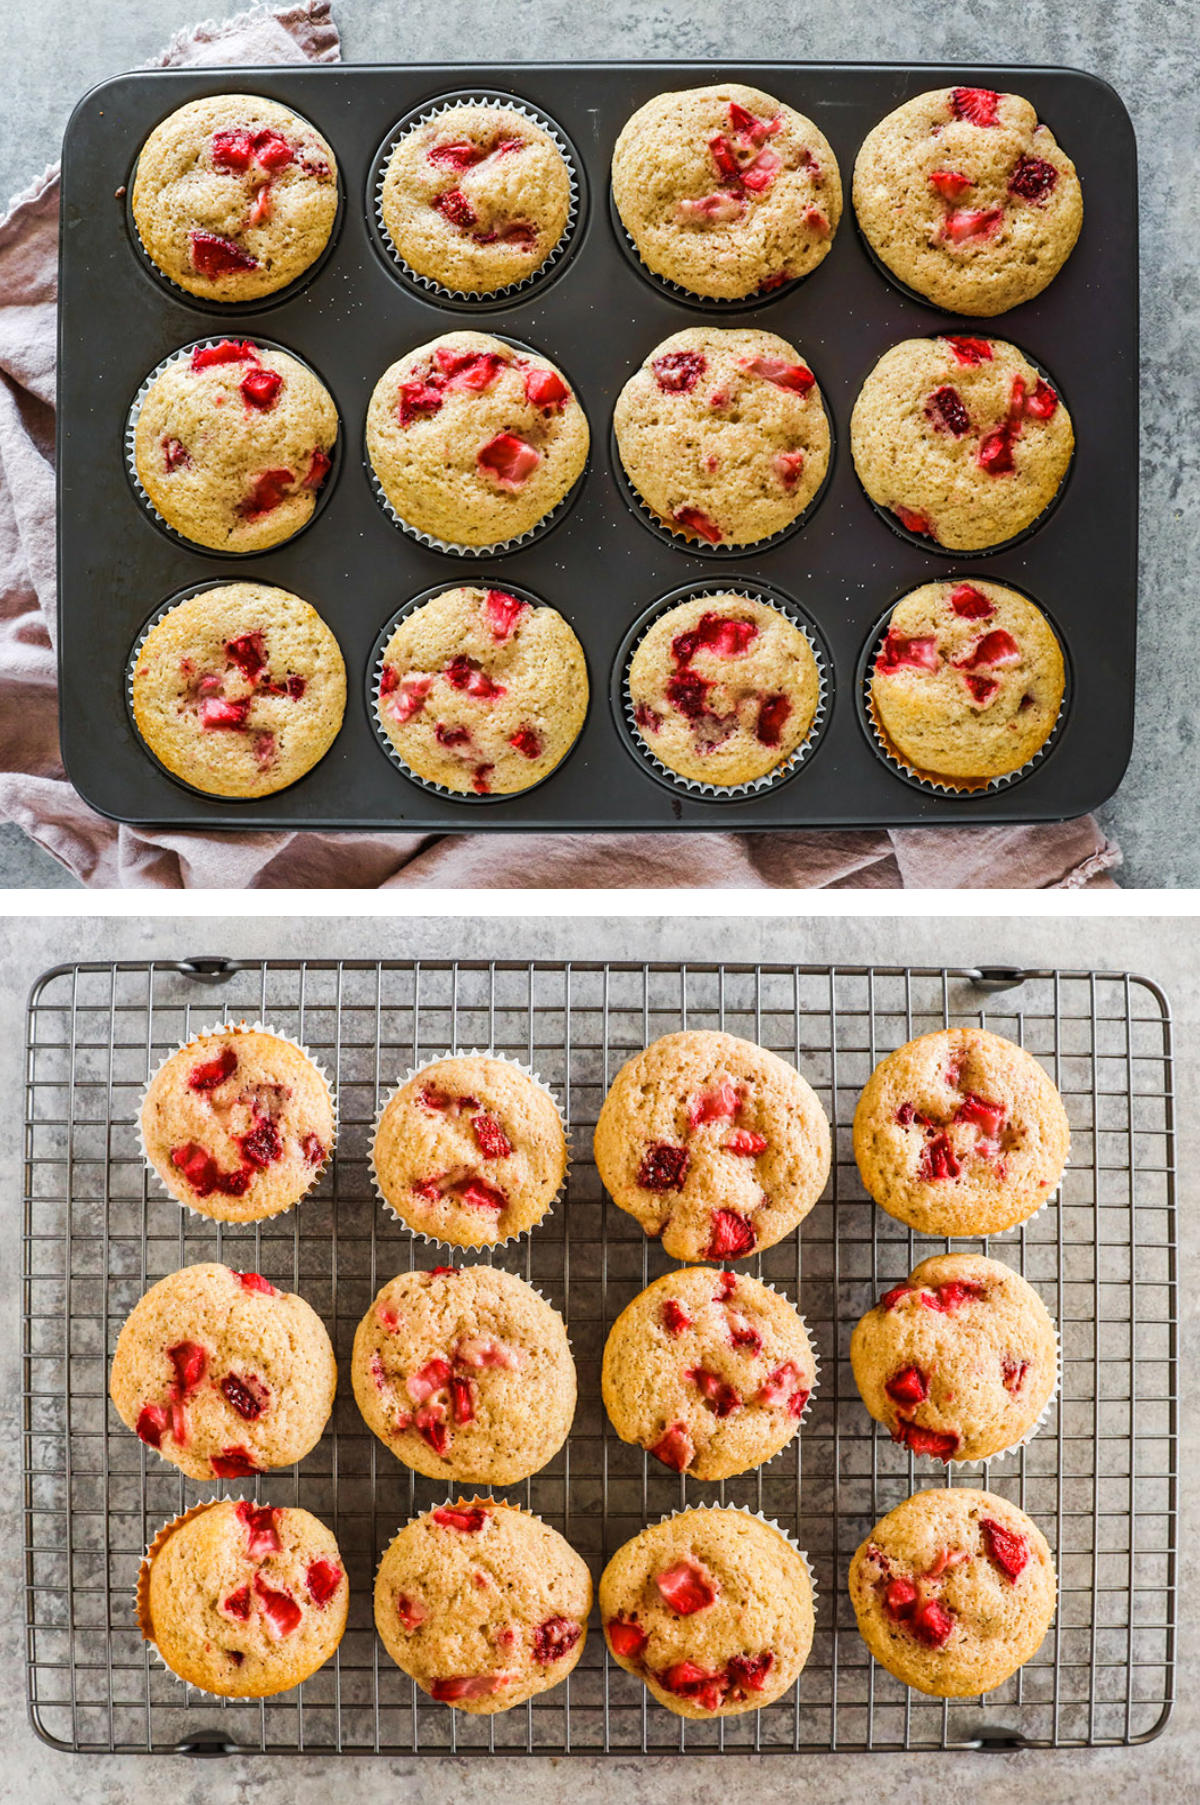 Two overhead images in one: 1. Muffins are cooked and resting in muffin tin. 2. Cooked muffins are placed on rack to finish cooling. 